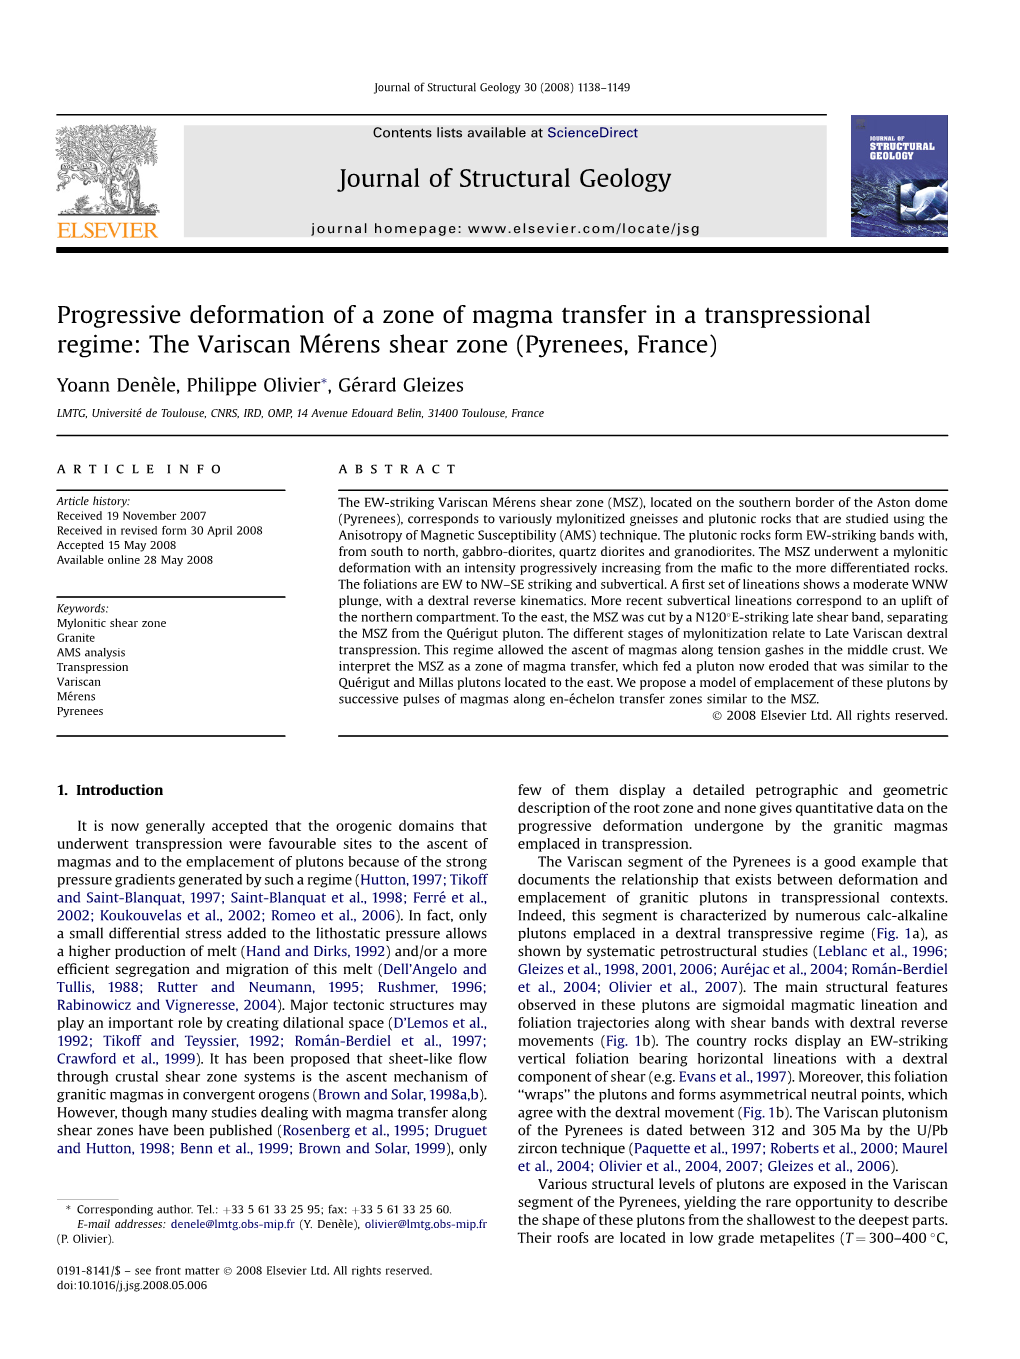 Progressive Deformation of a Zone of Magma Transfer in a Transpressional Regime: the Variscan Me´Rens Shear Zone (Pyrenees, France)